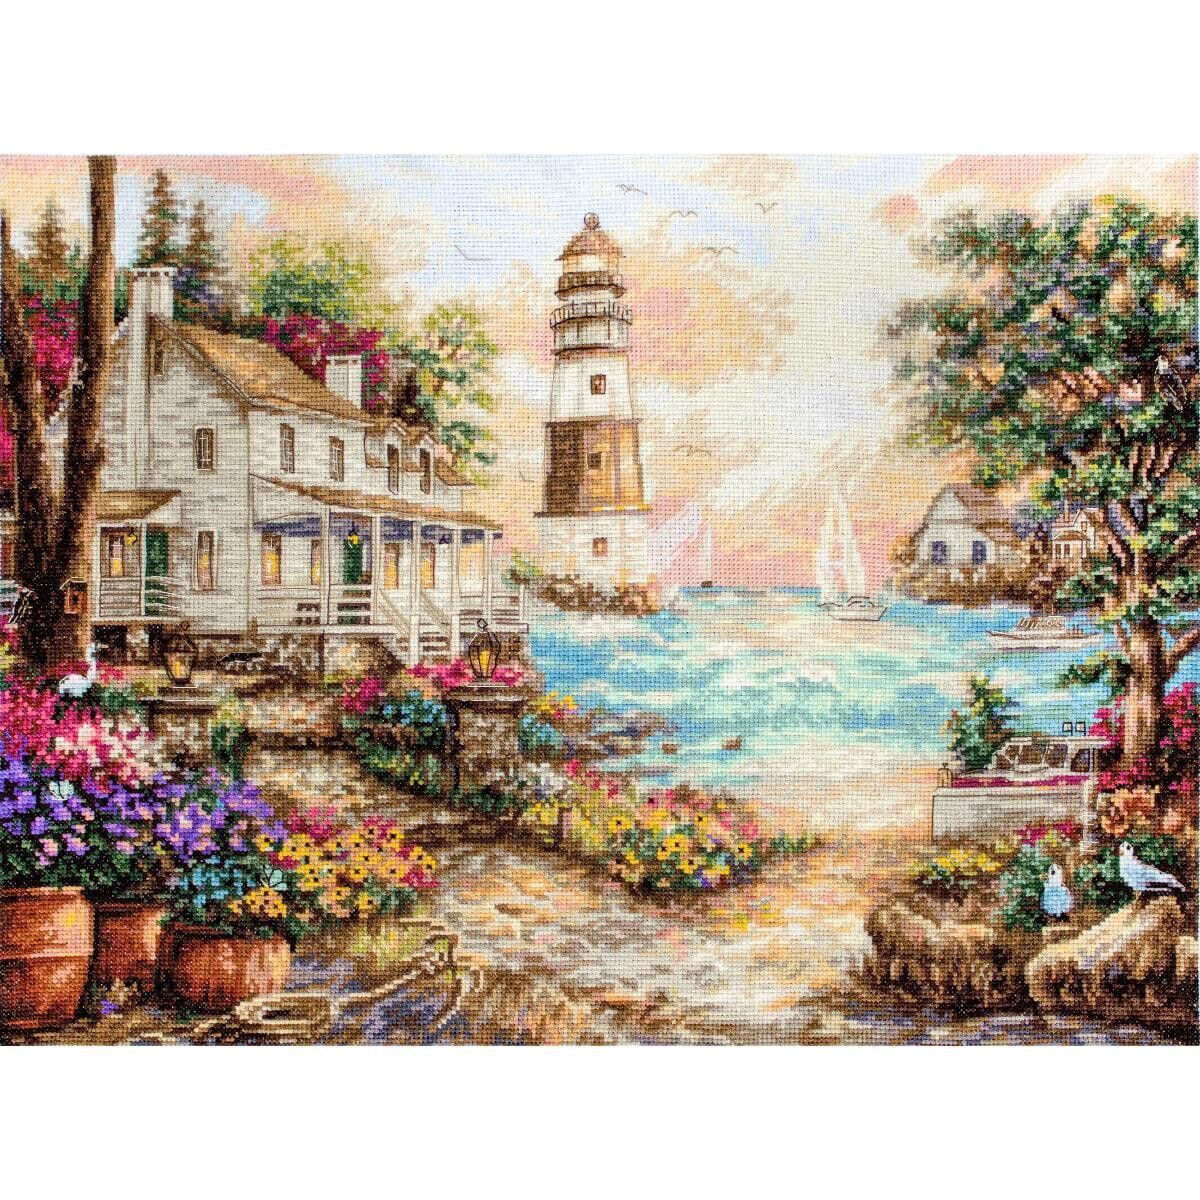 A colorful scene shows a cottage by the sea with...